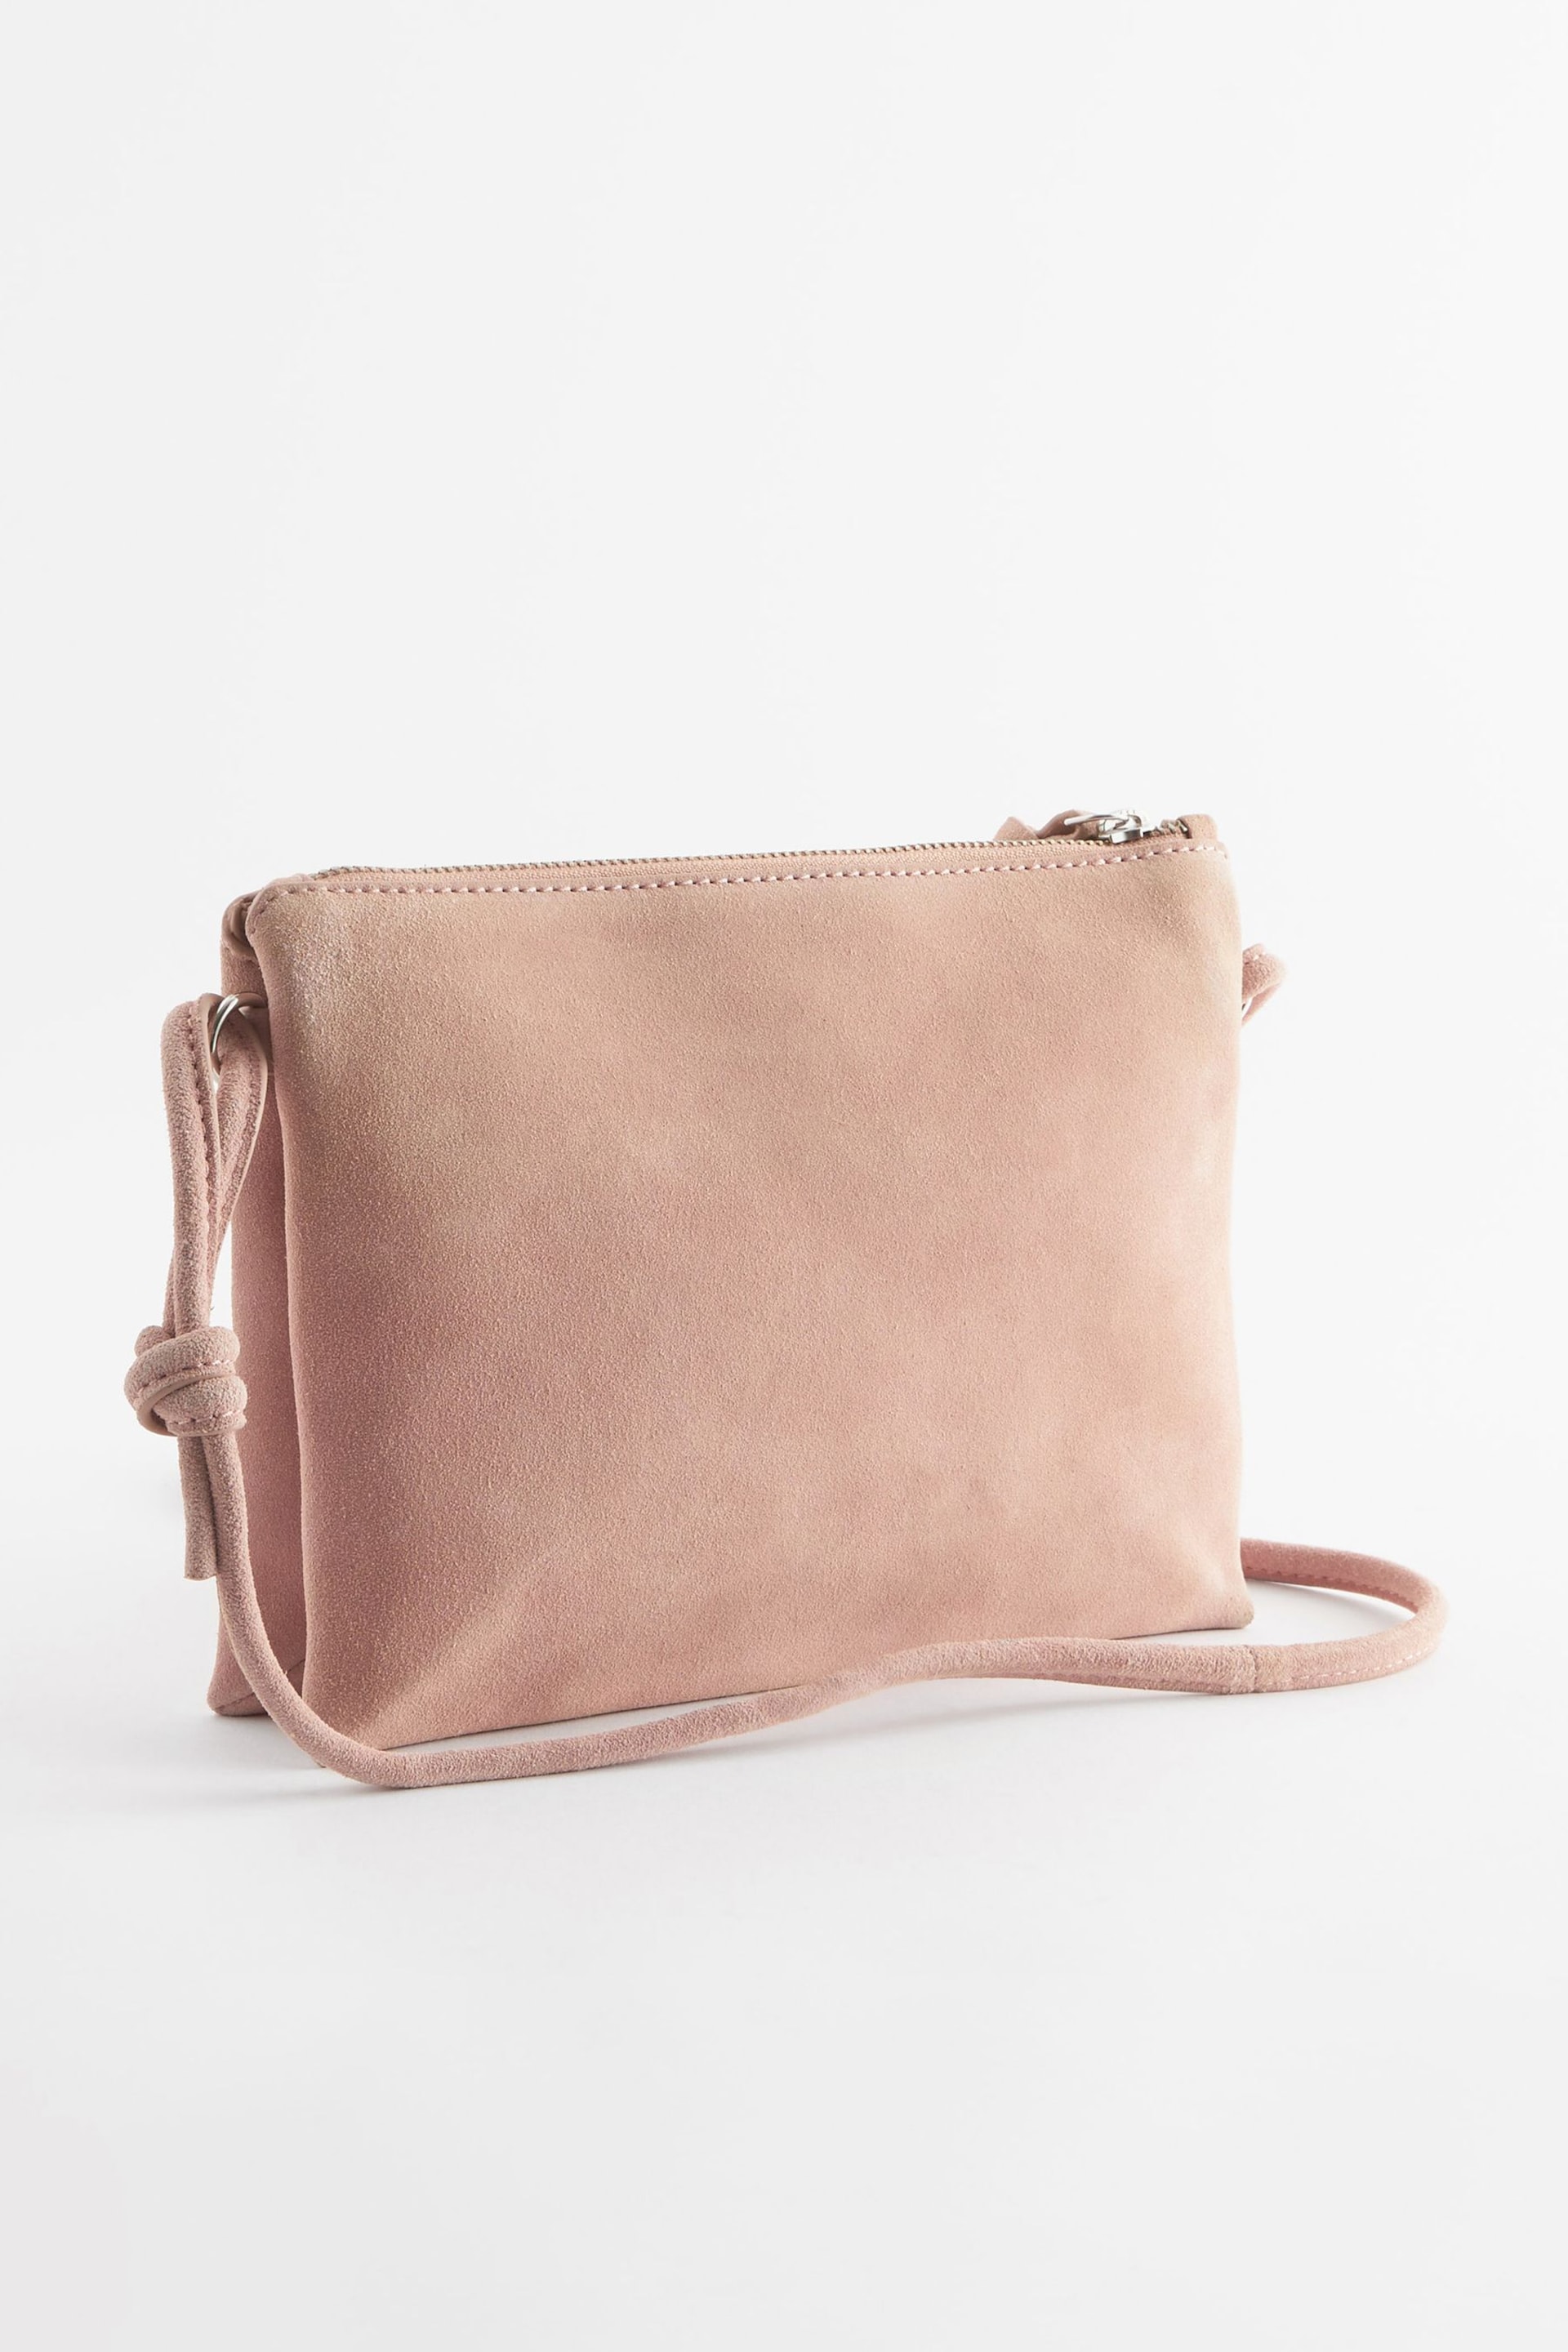 Pink Leather Cross-Body Bag - Image 5 of 6